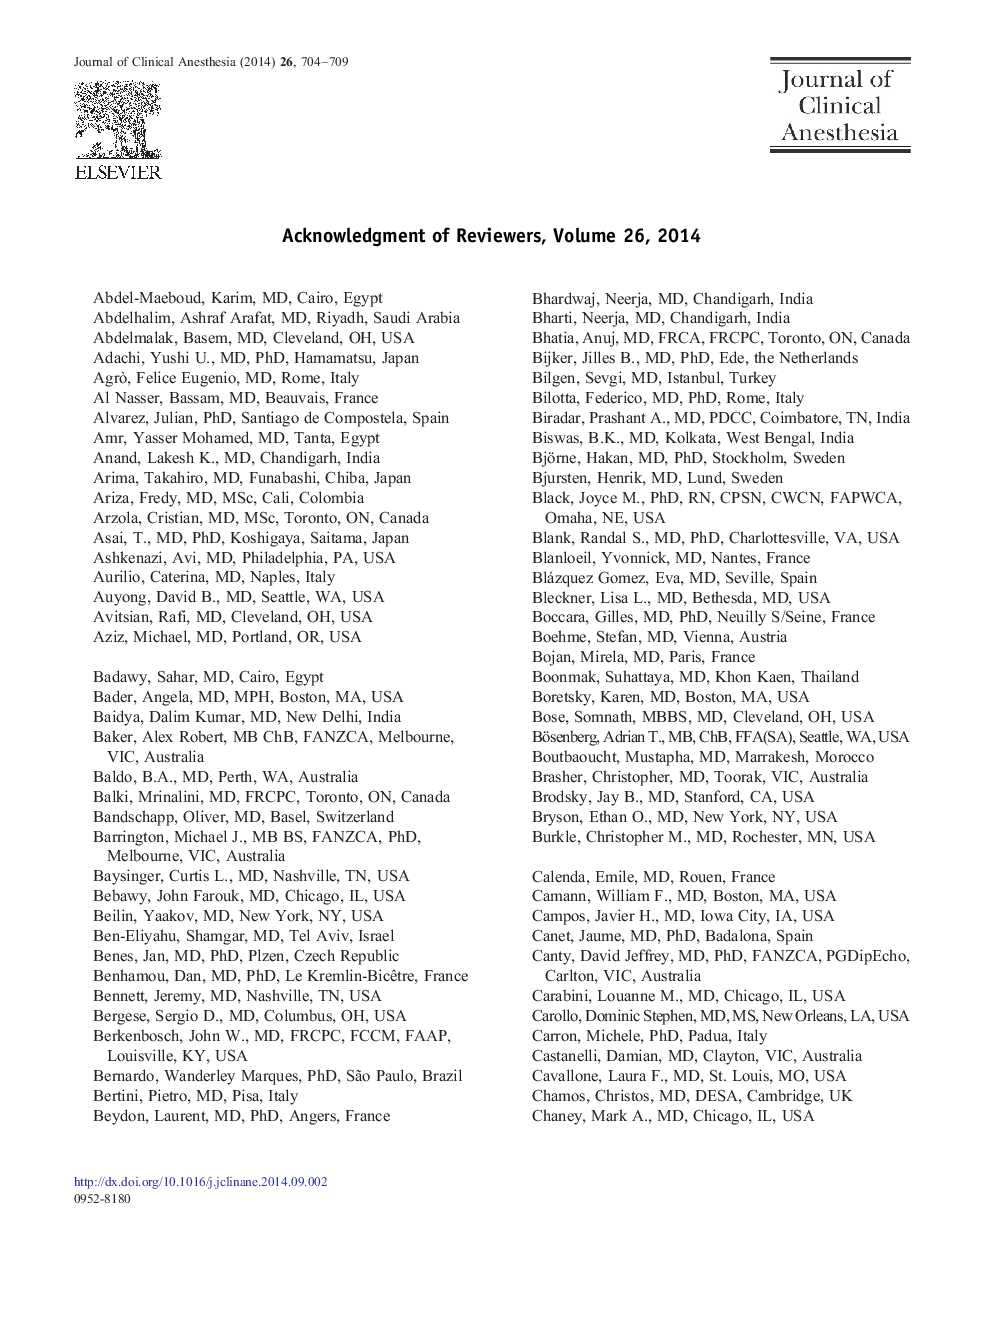 Acknowledgment of Reviewers, Volume 26, 2014